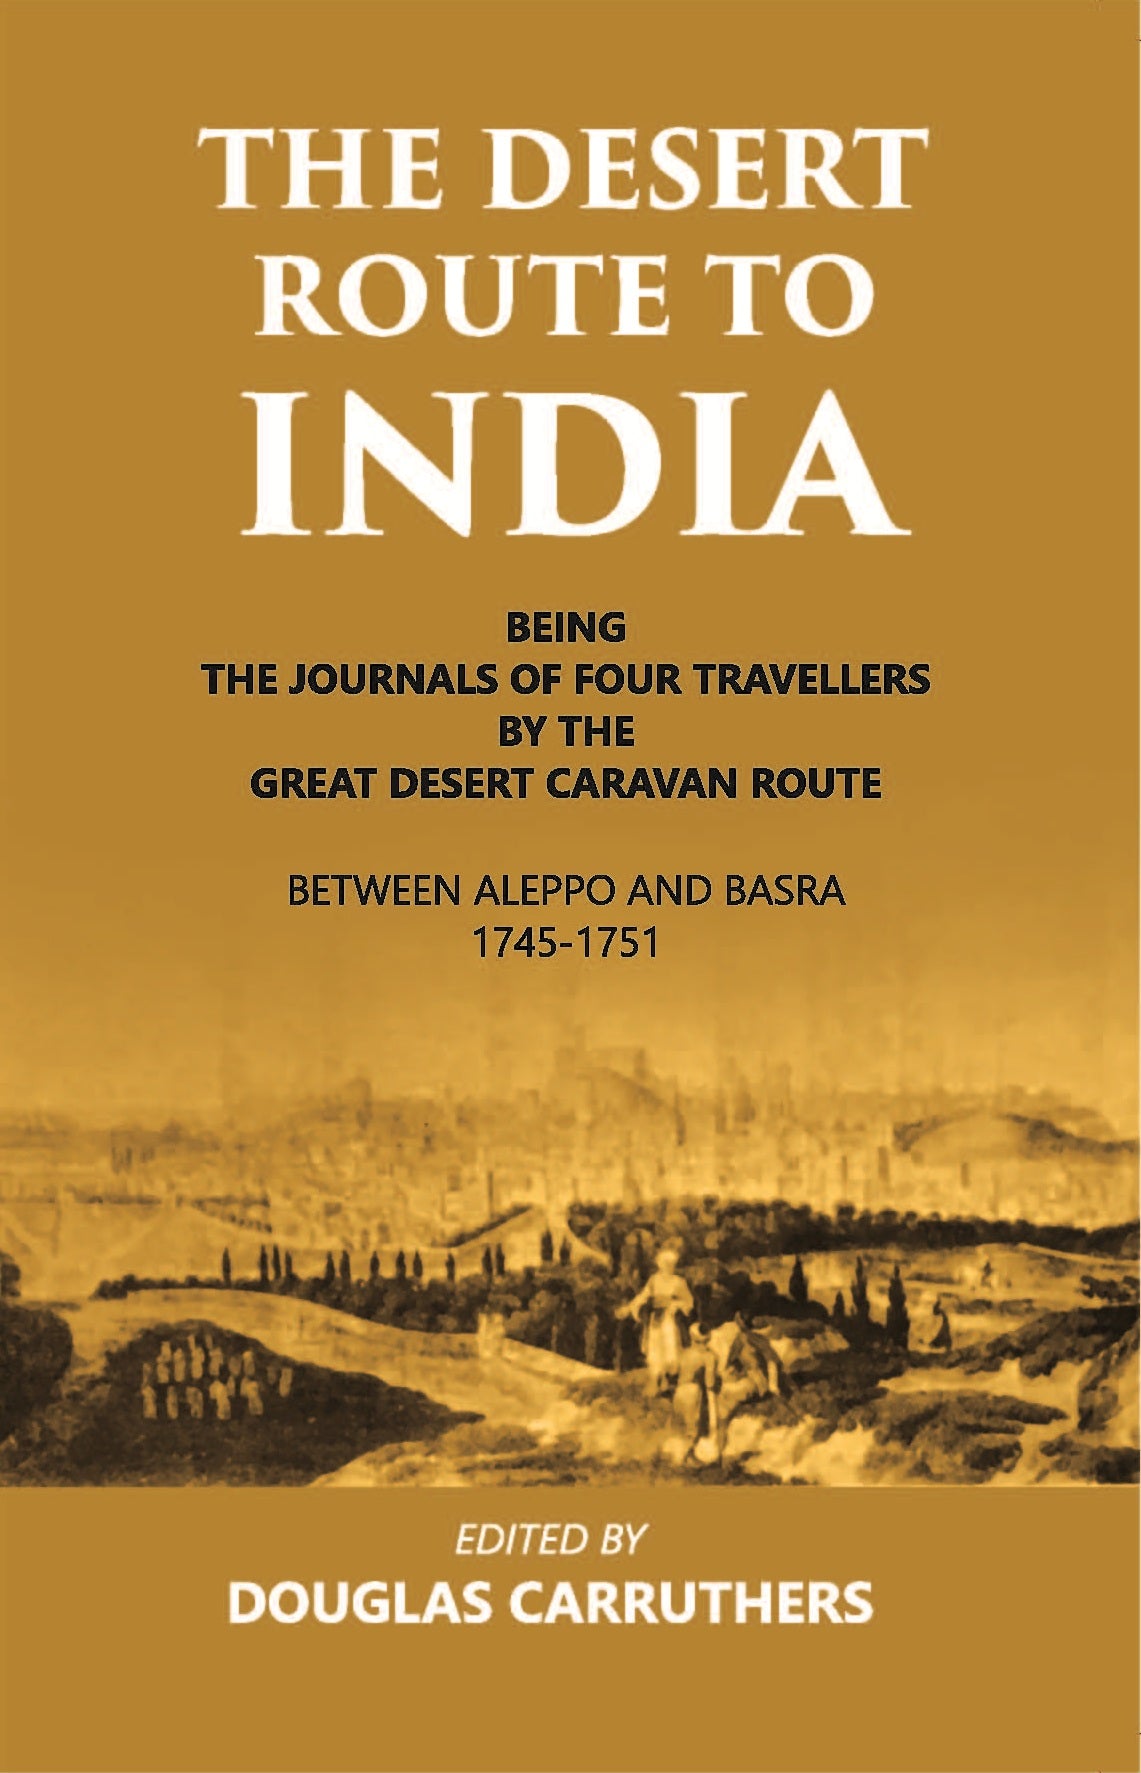 The Desert Route To India Being The Journals Of Four Travellers By The Great Desert Caravan Route Between Aleppo And Basra 1745-1751